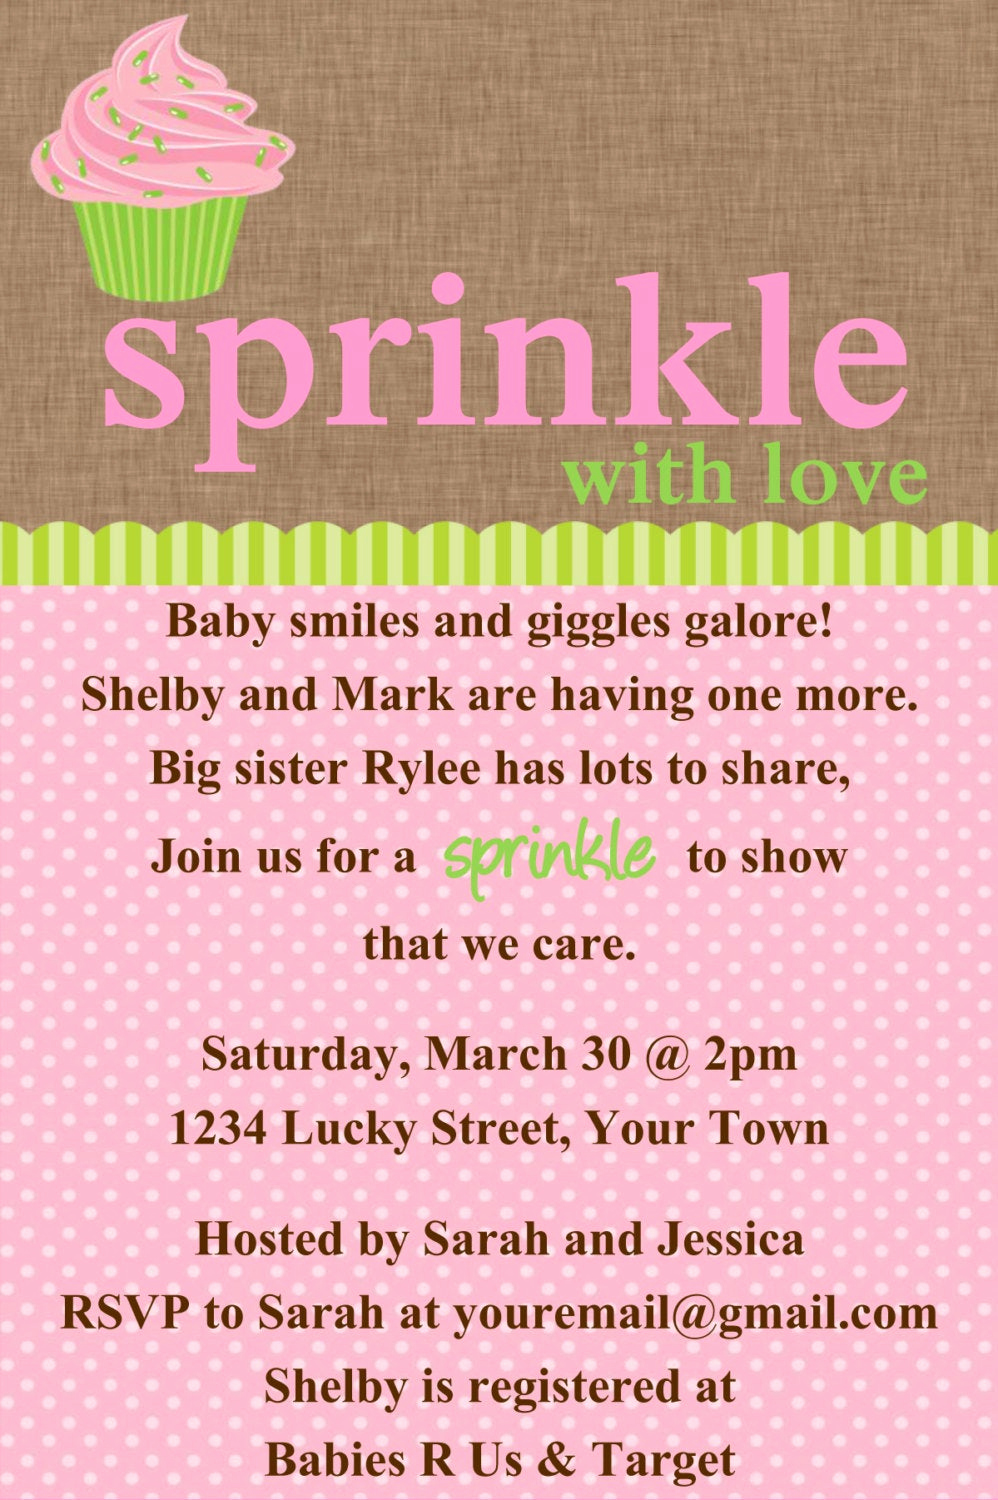 Free Baby Sprinkle Invitation Templates Lovely Sprinkle Baby Shower Green Border Invitation Template 4x6